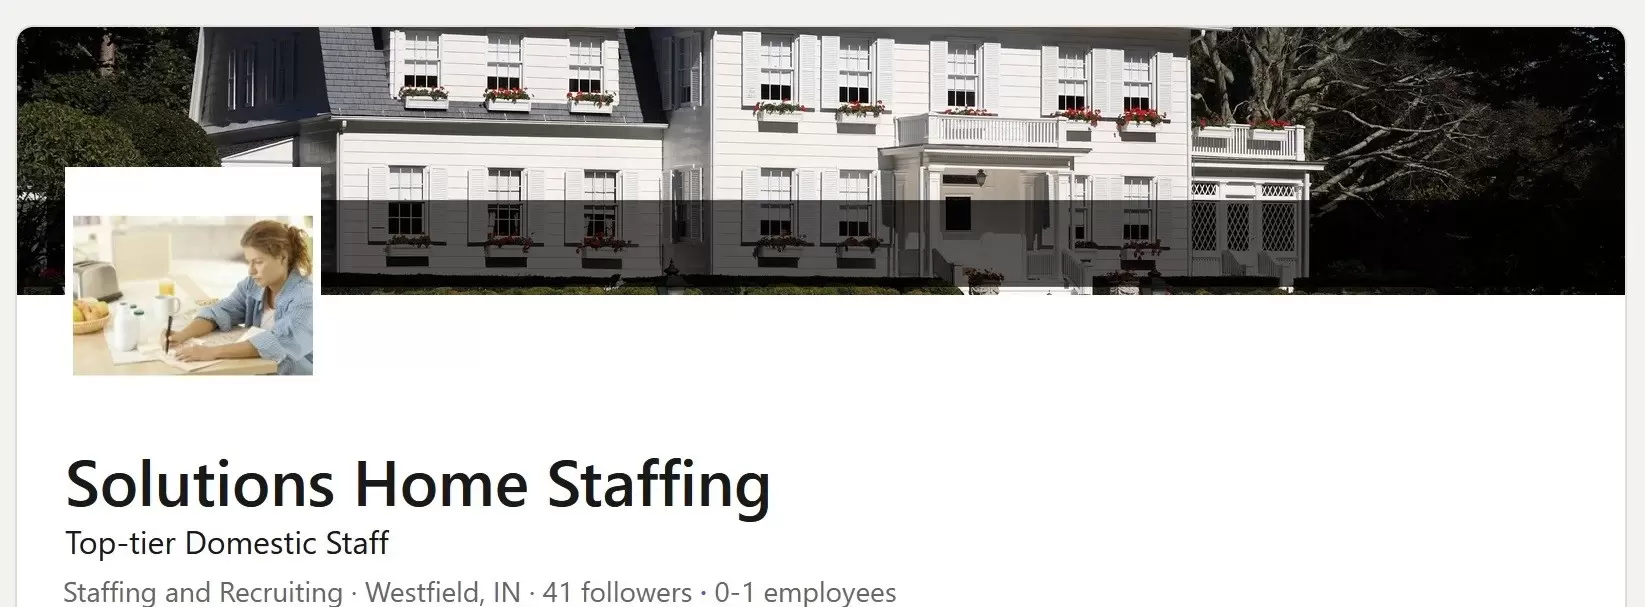 Solutions Home Staffing on LinkedIn